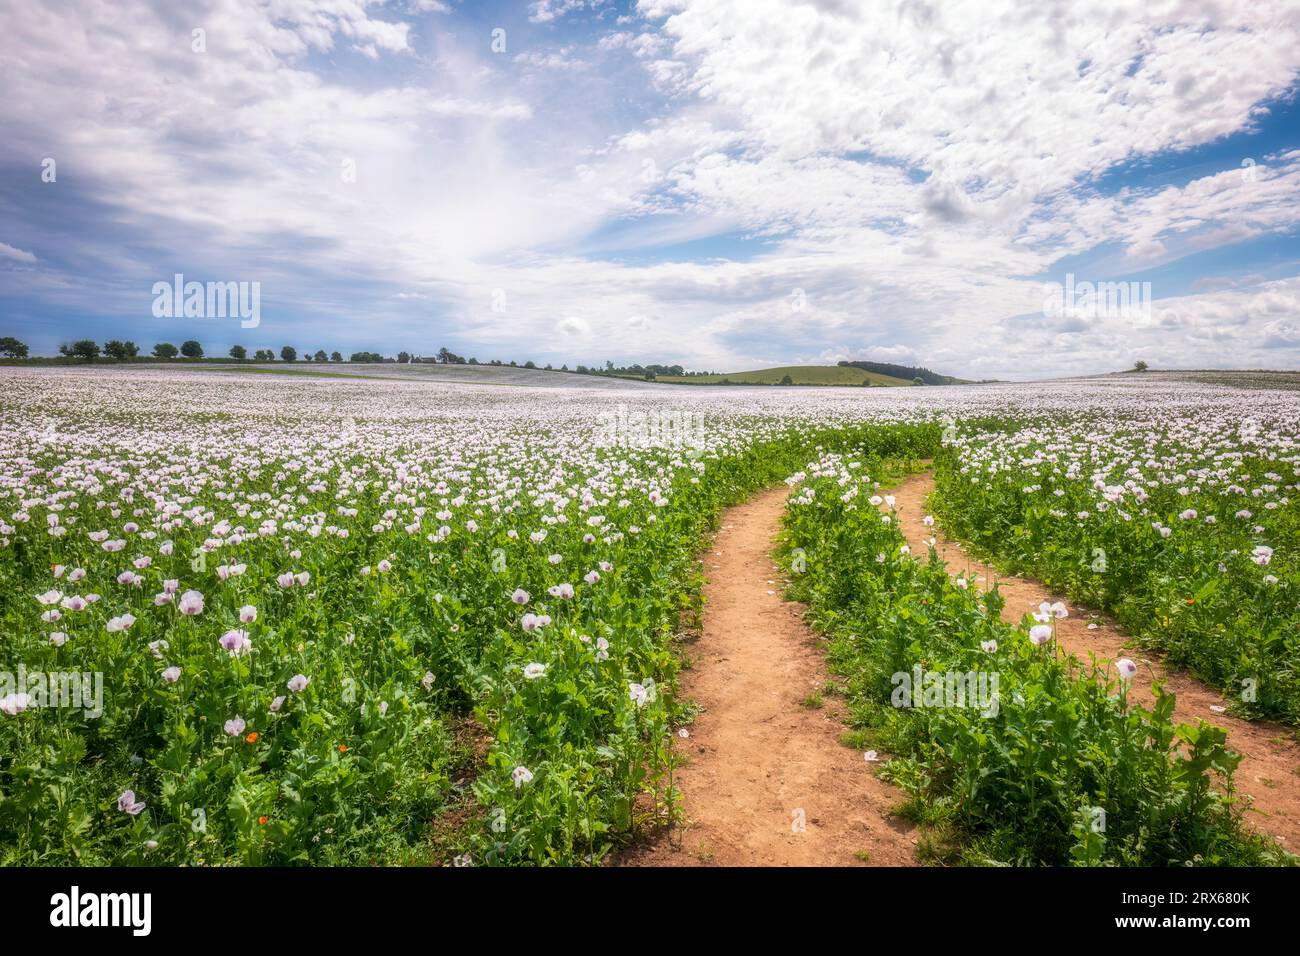 UK, England, Tire tracks cutting through vast summer meadow with white blooming poppies Stock Photo